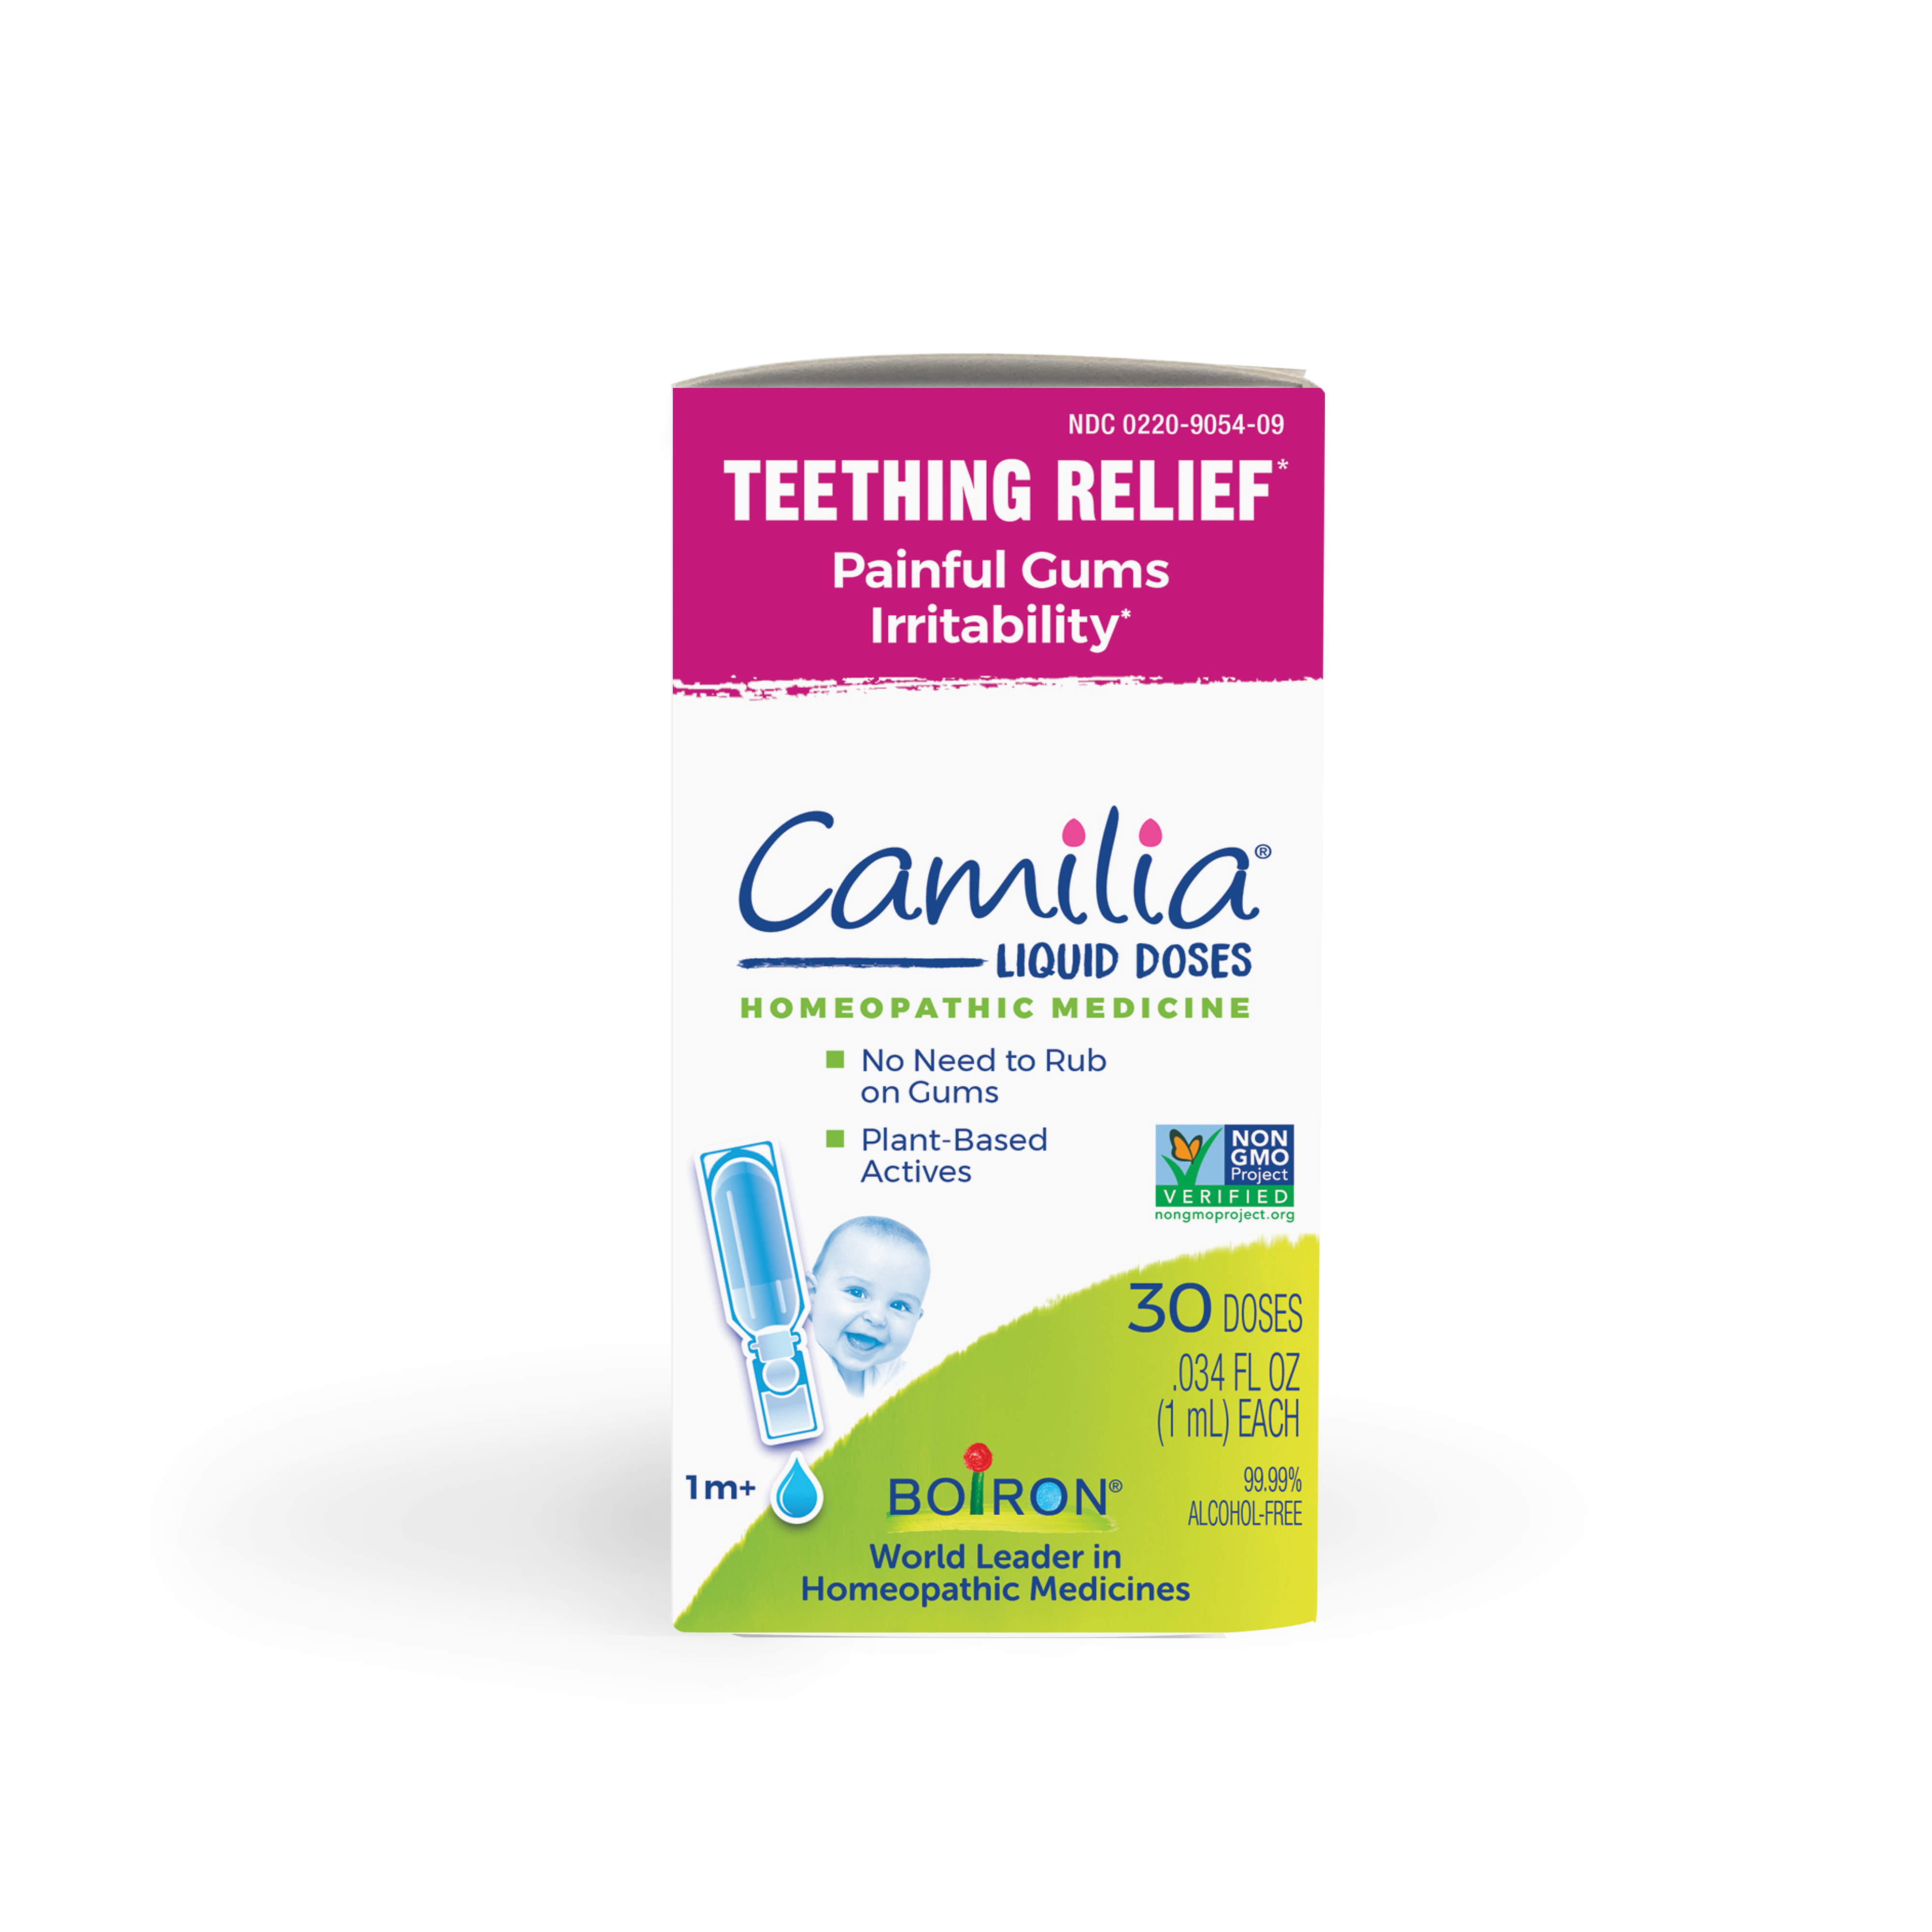 Boiron Camilia Teething Drops for Daytime and Nighttime Relief of Painful or Swollen Gums and Irritability in Babies, Irritability, 30 Single Liquid Doses - image 4 of 11